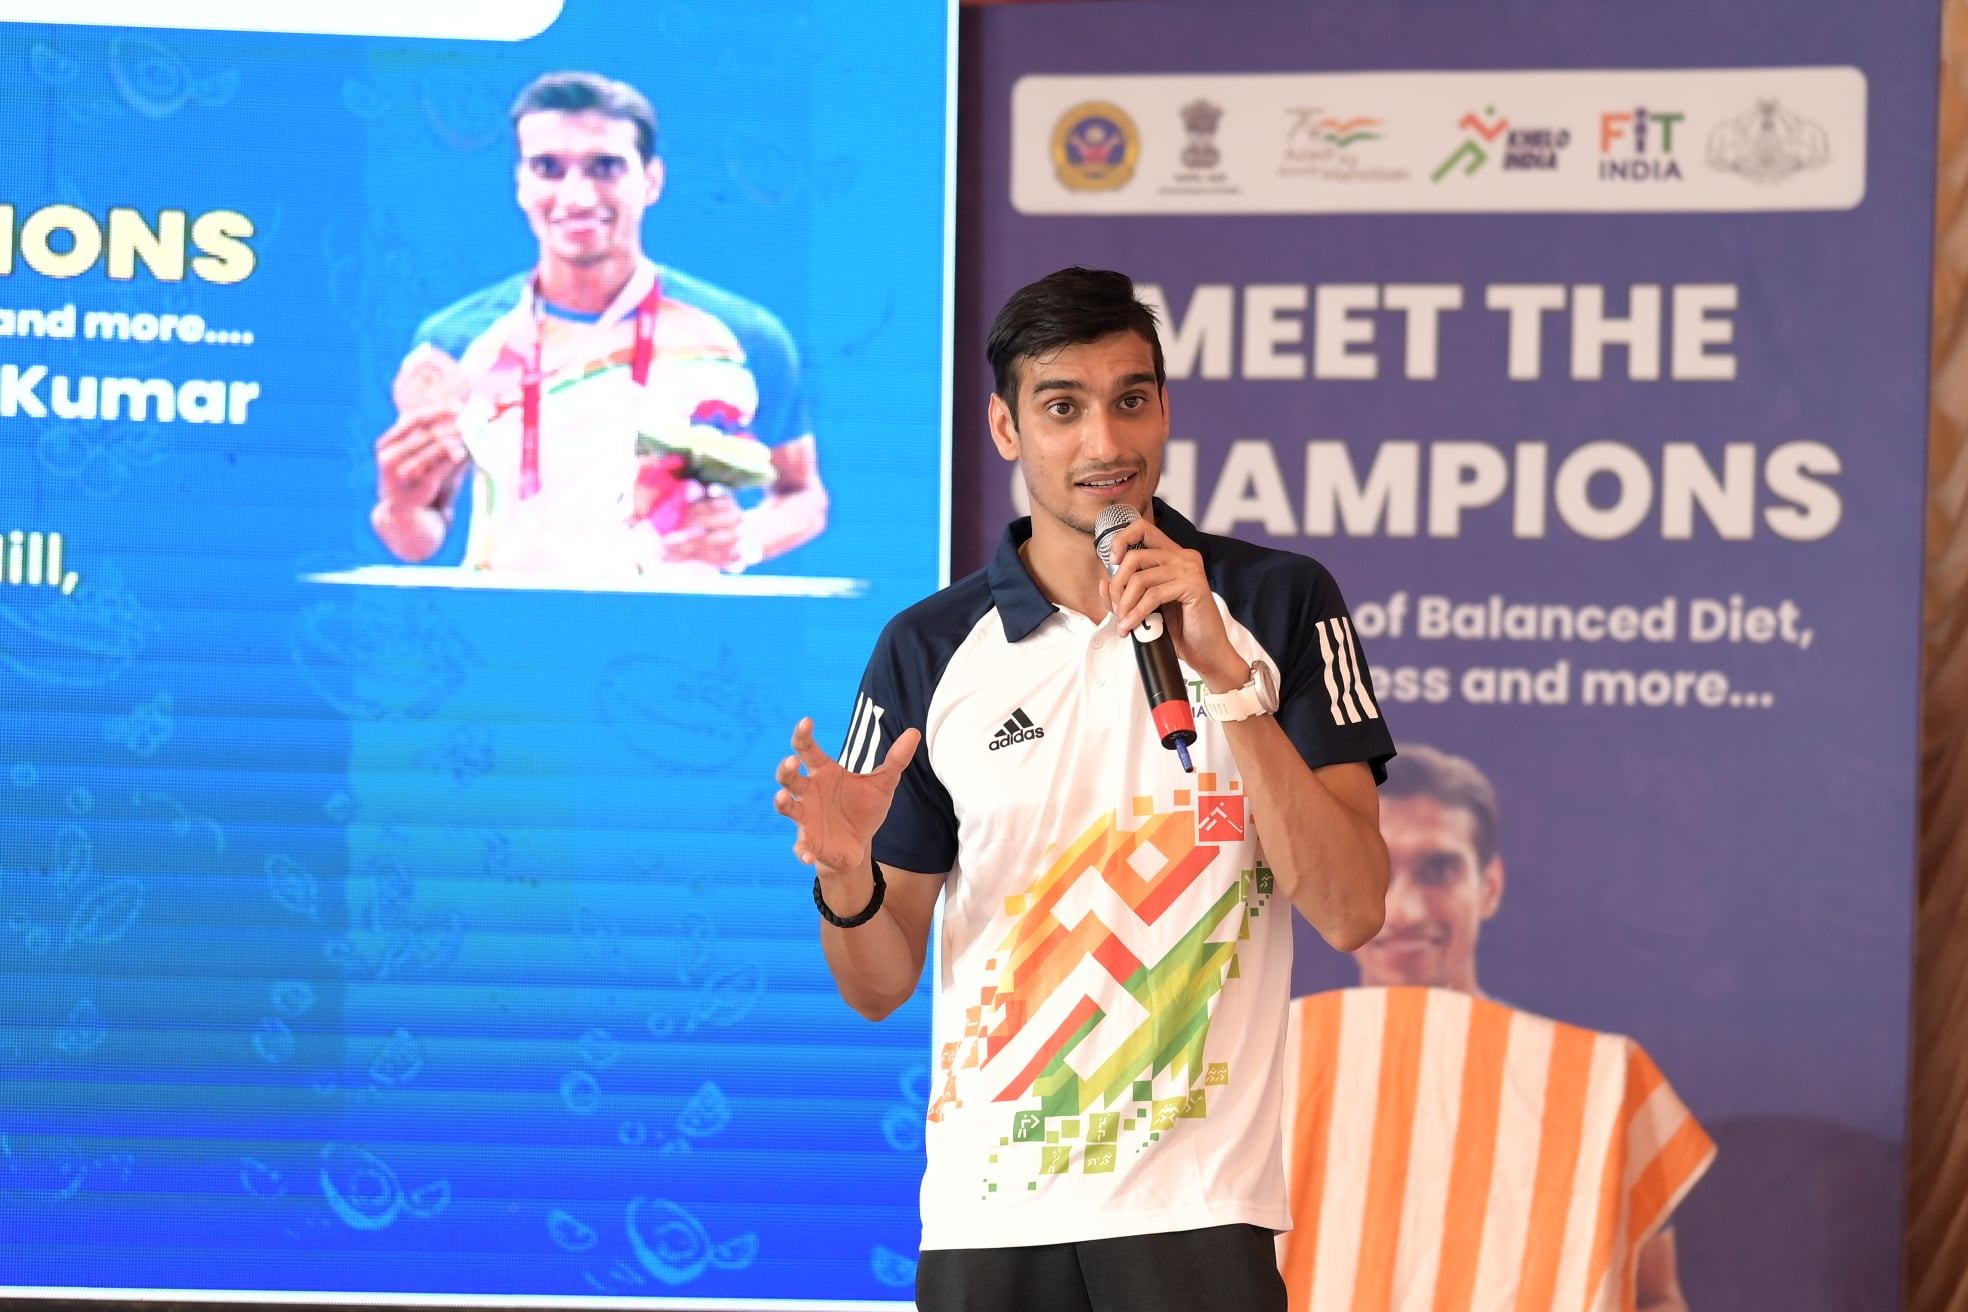 Tokyo 2020 bronze medallist Kumar commences Paralympic leg of Indian Prime Minister's "Meet the Champions" initiative